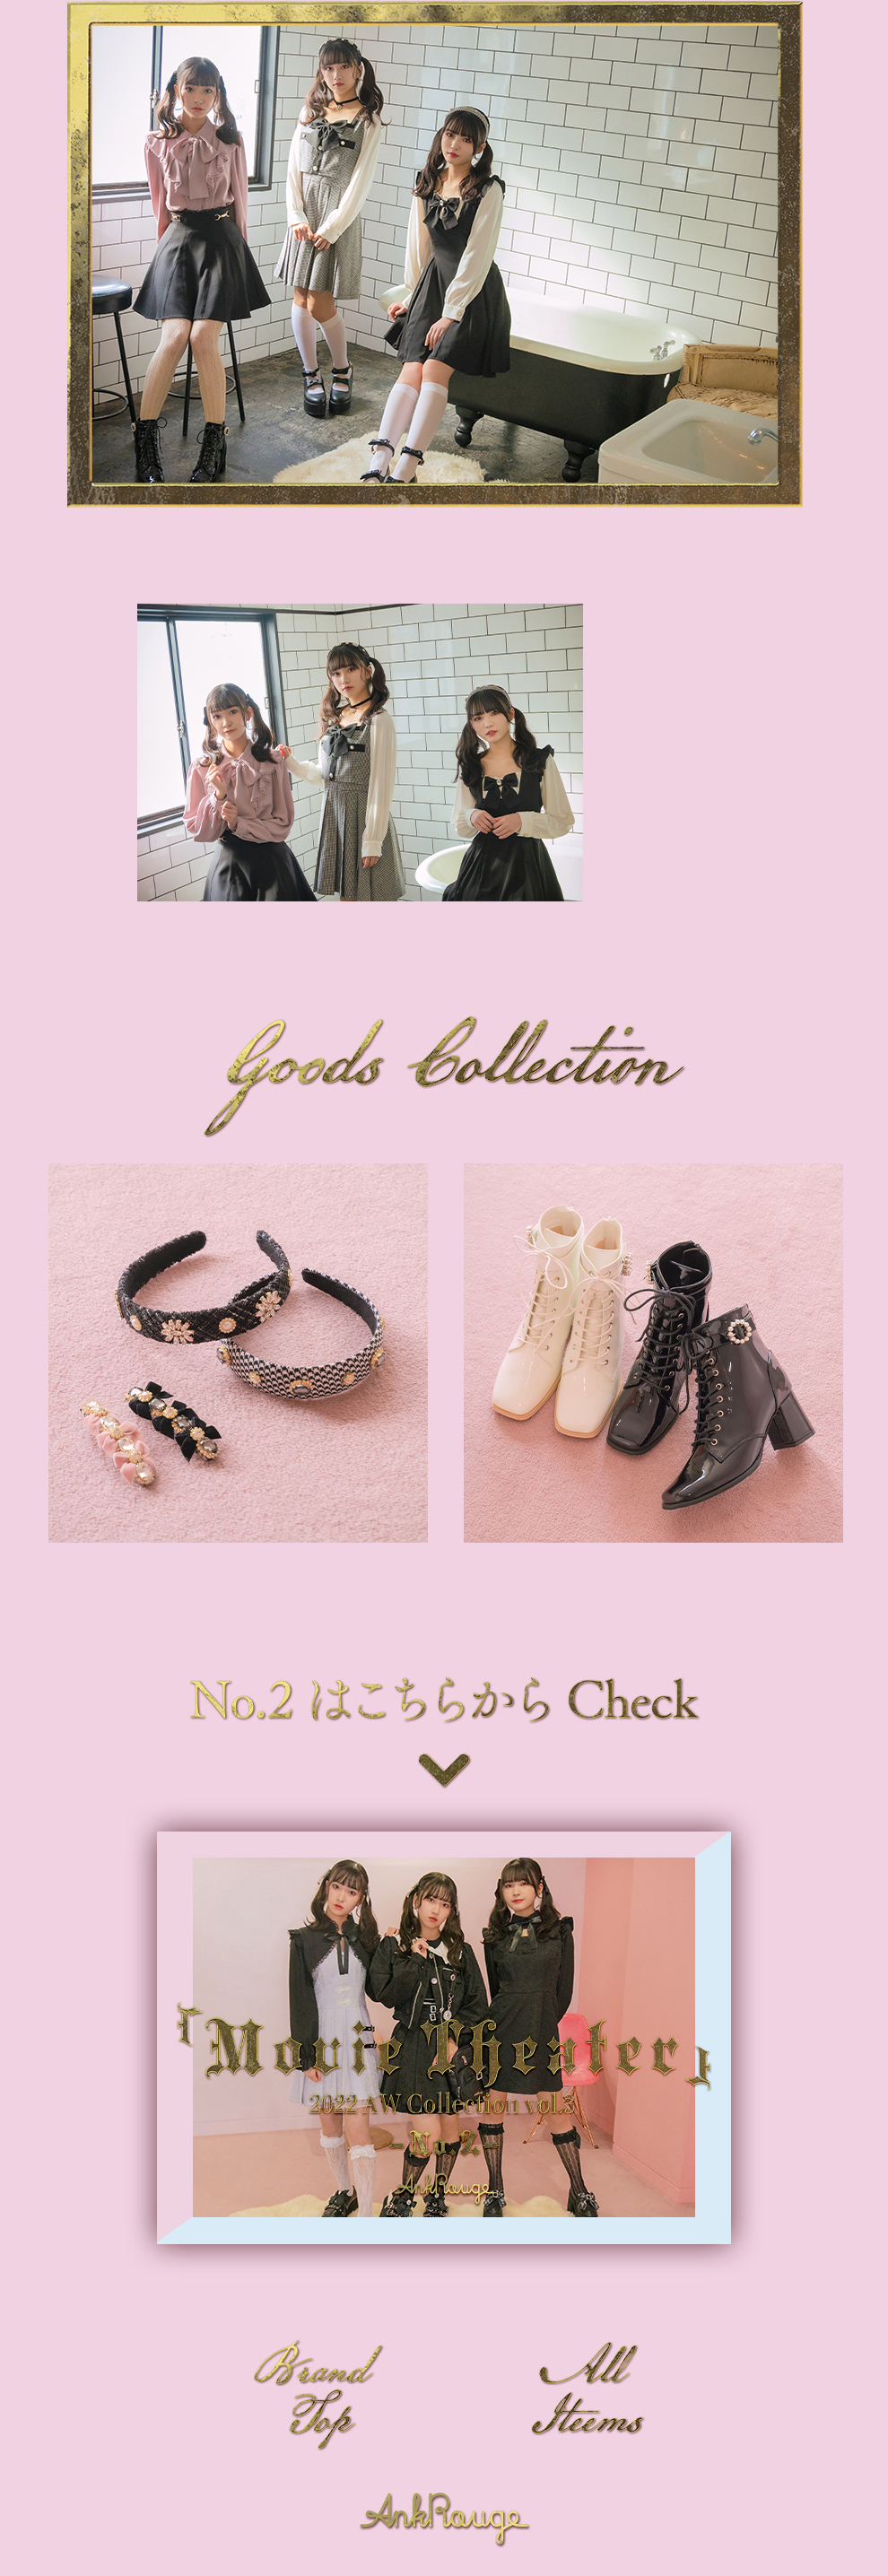 2022 AW Collection vol.3